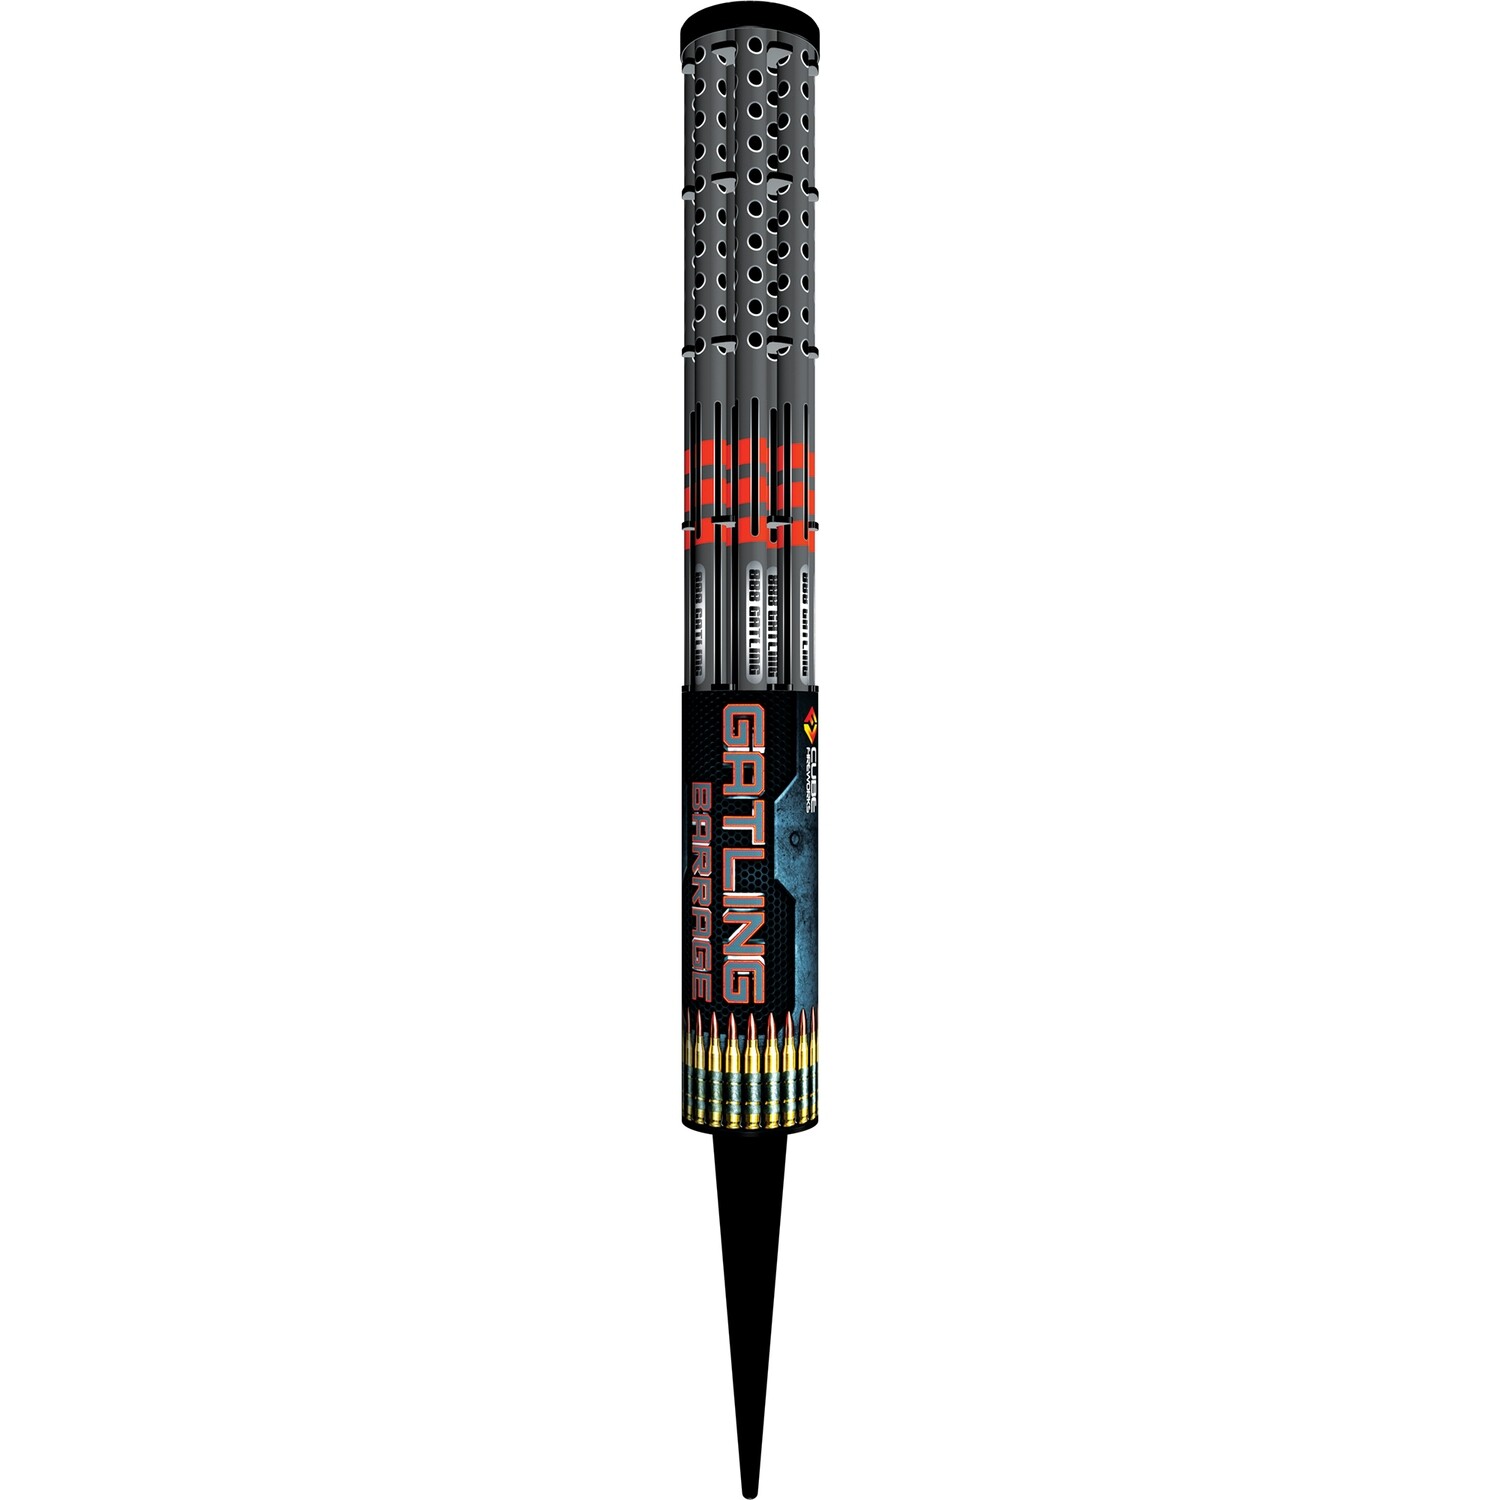 FD301 888 Gatling Barrage 300 Shot Roman Candle - ONLY 1 CANDLE SUPPLIED NOT 3